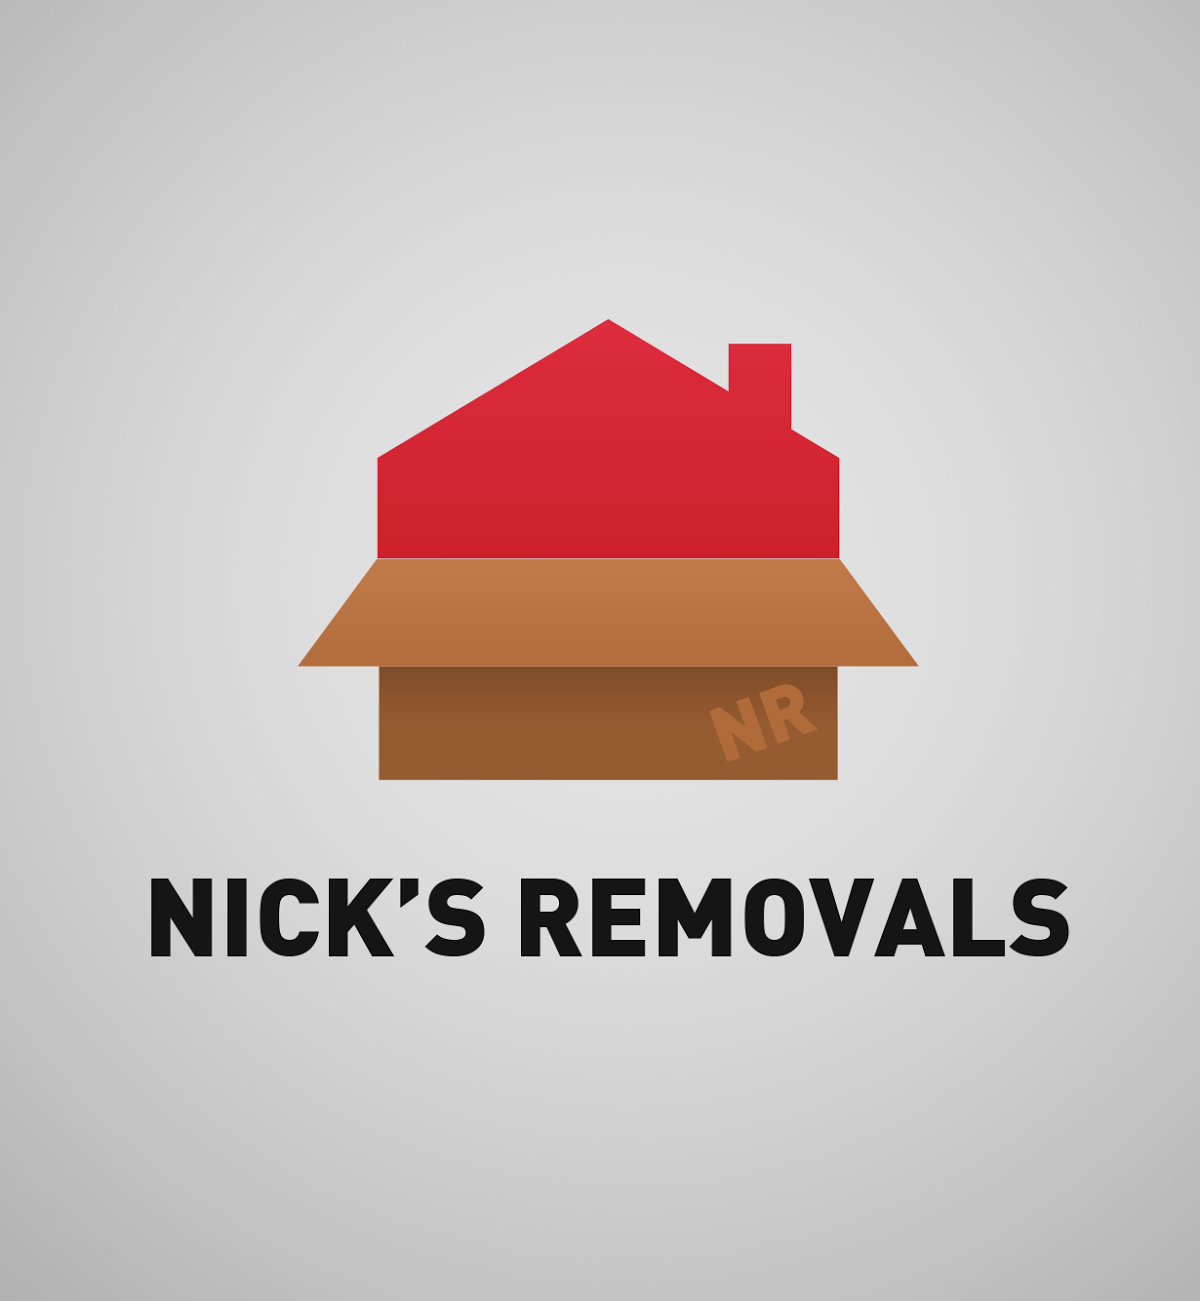 Logo of Nicks Removals Removals And Storage - Household In Manchester, Lancashire